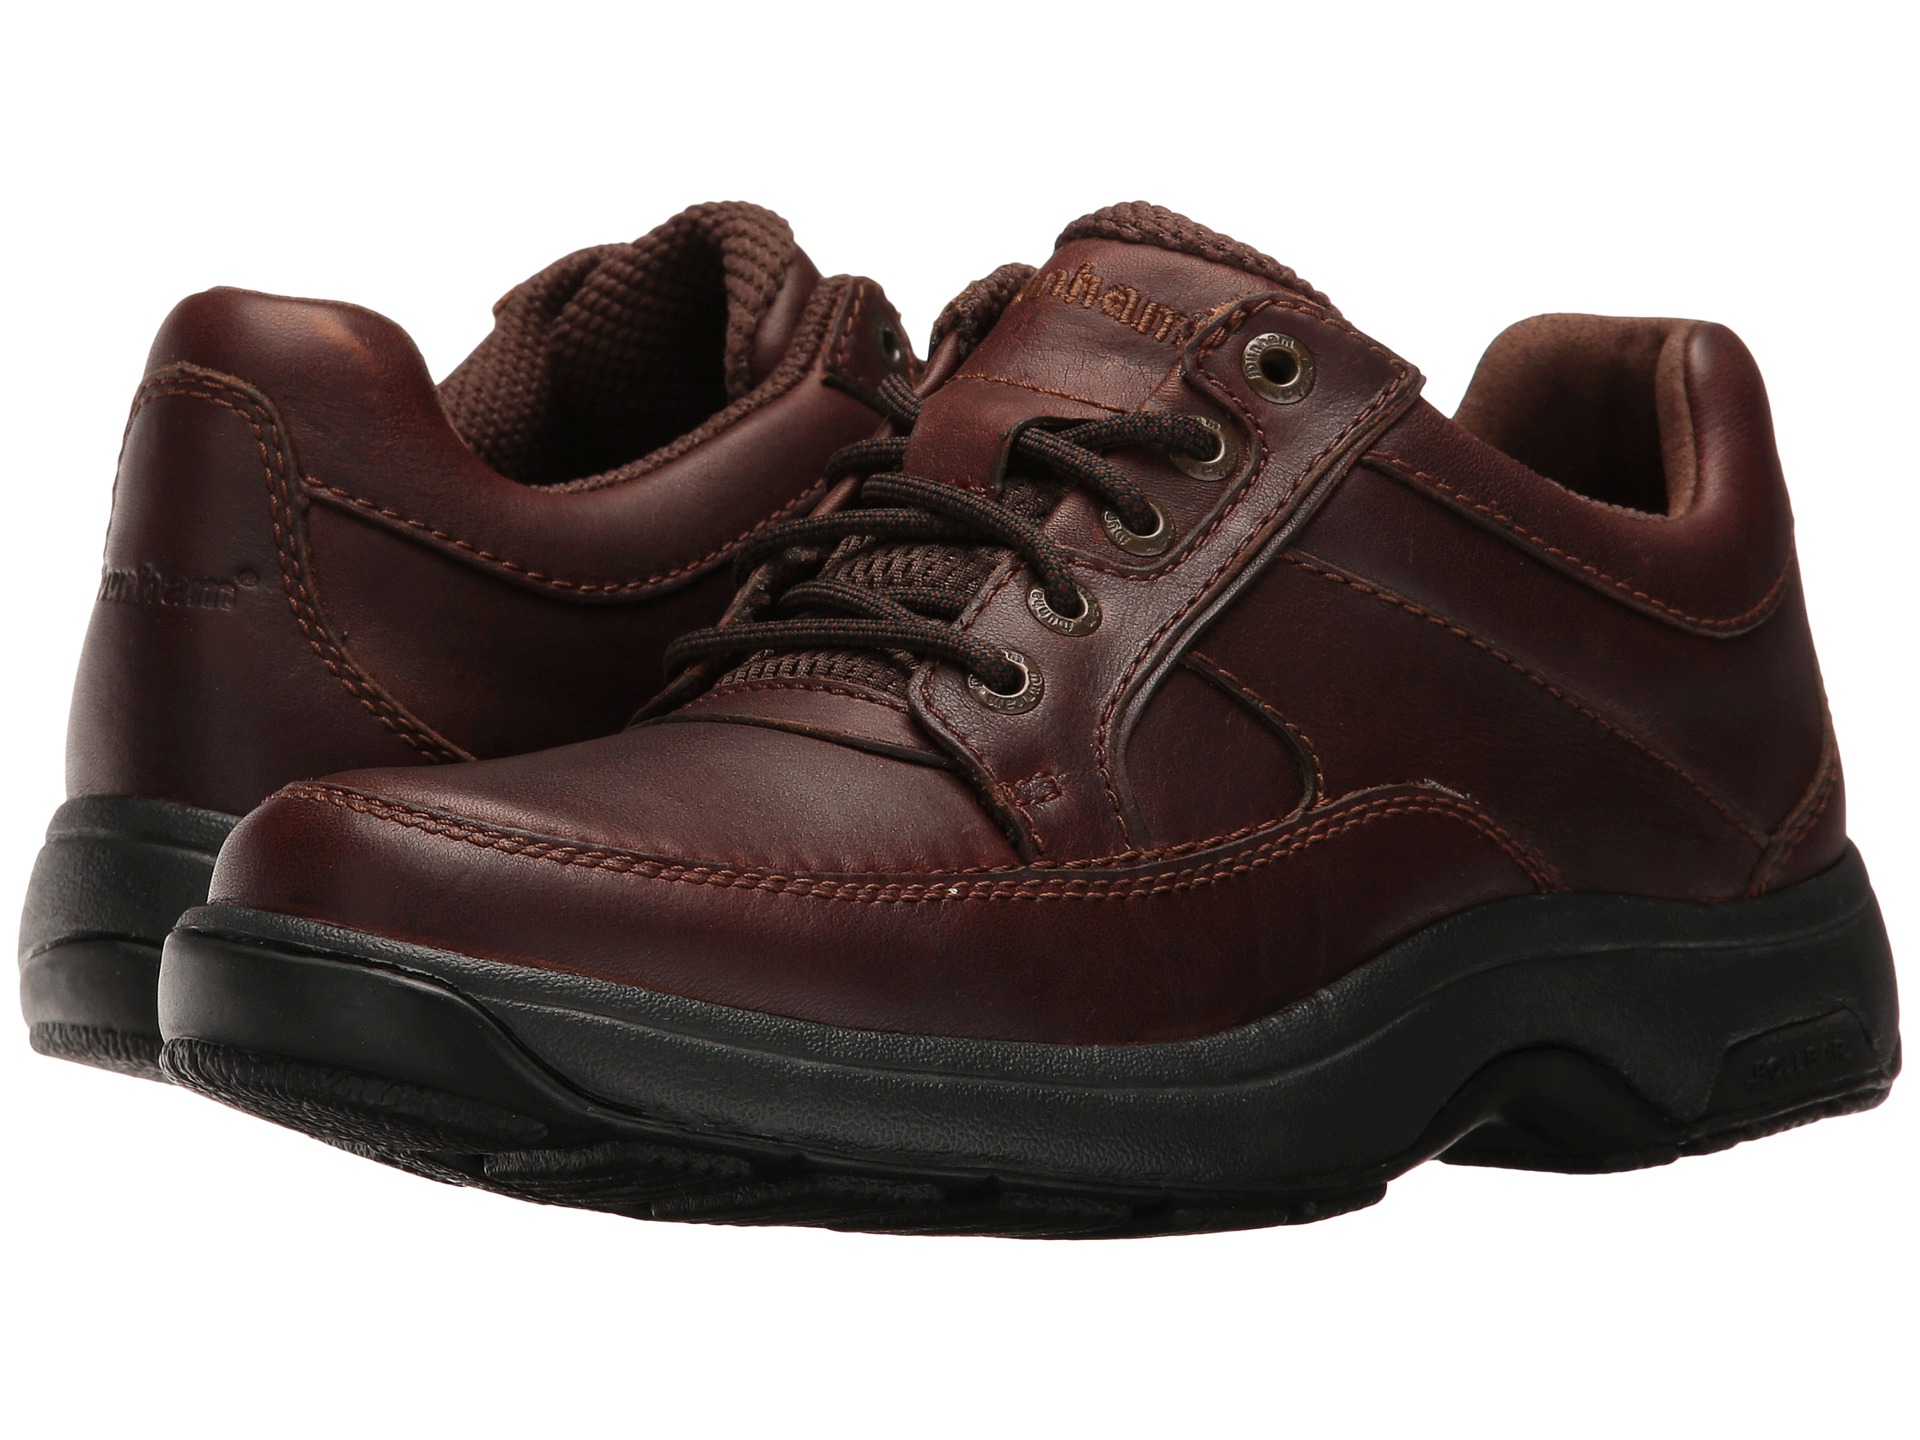 Dunham Midland Oxford Brown Polished Leather - Zappos.com Free Shipping ...